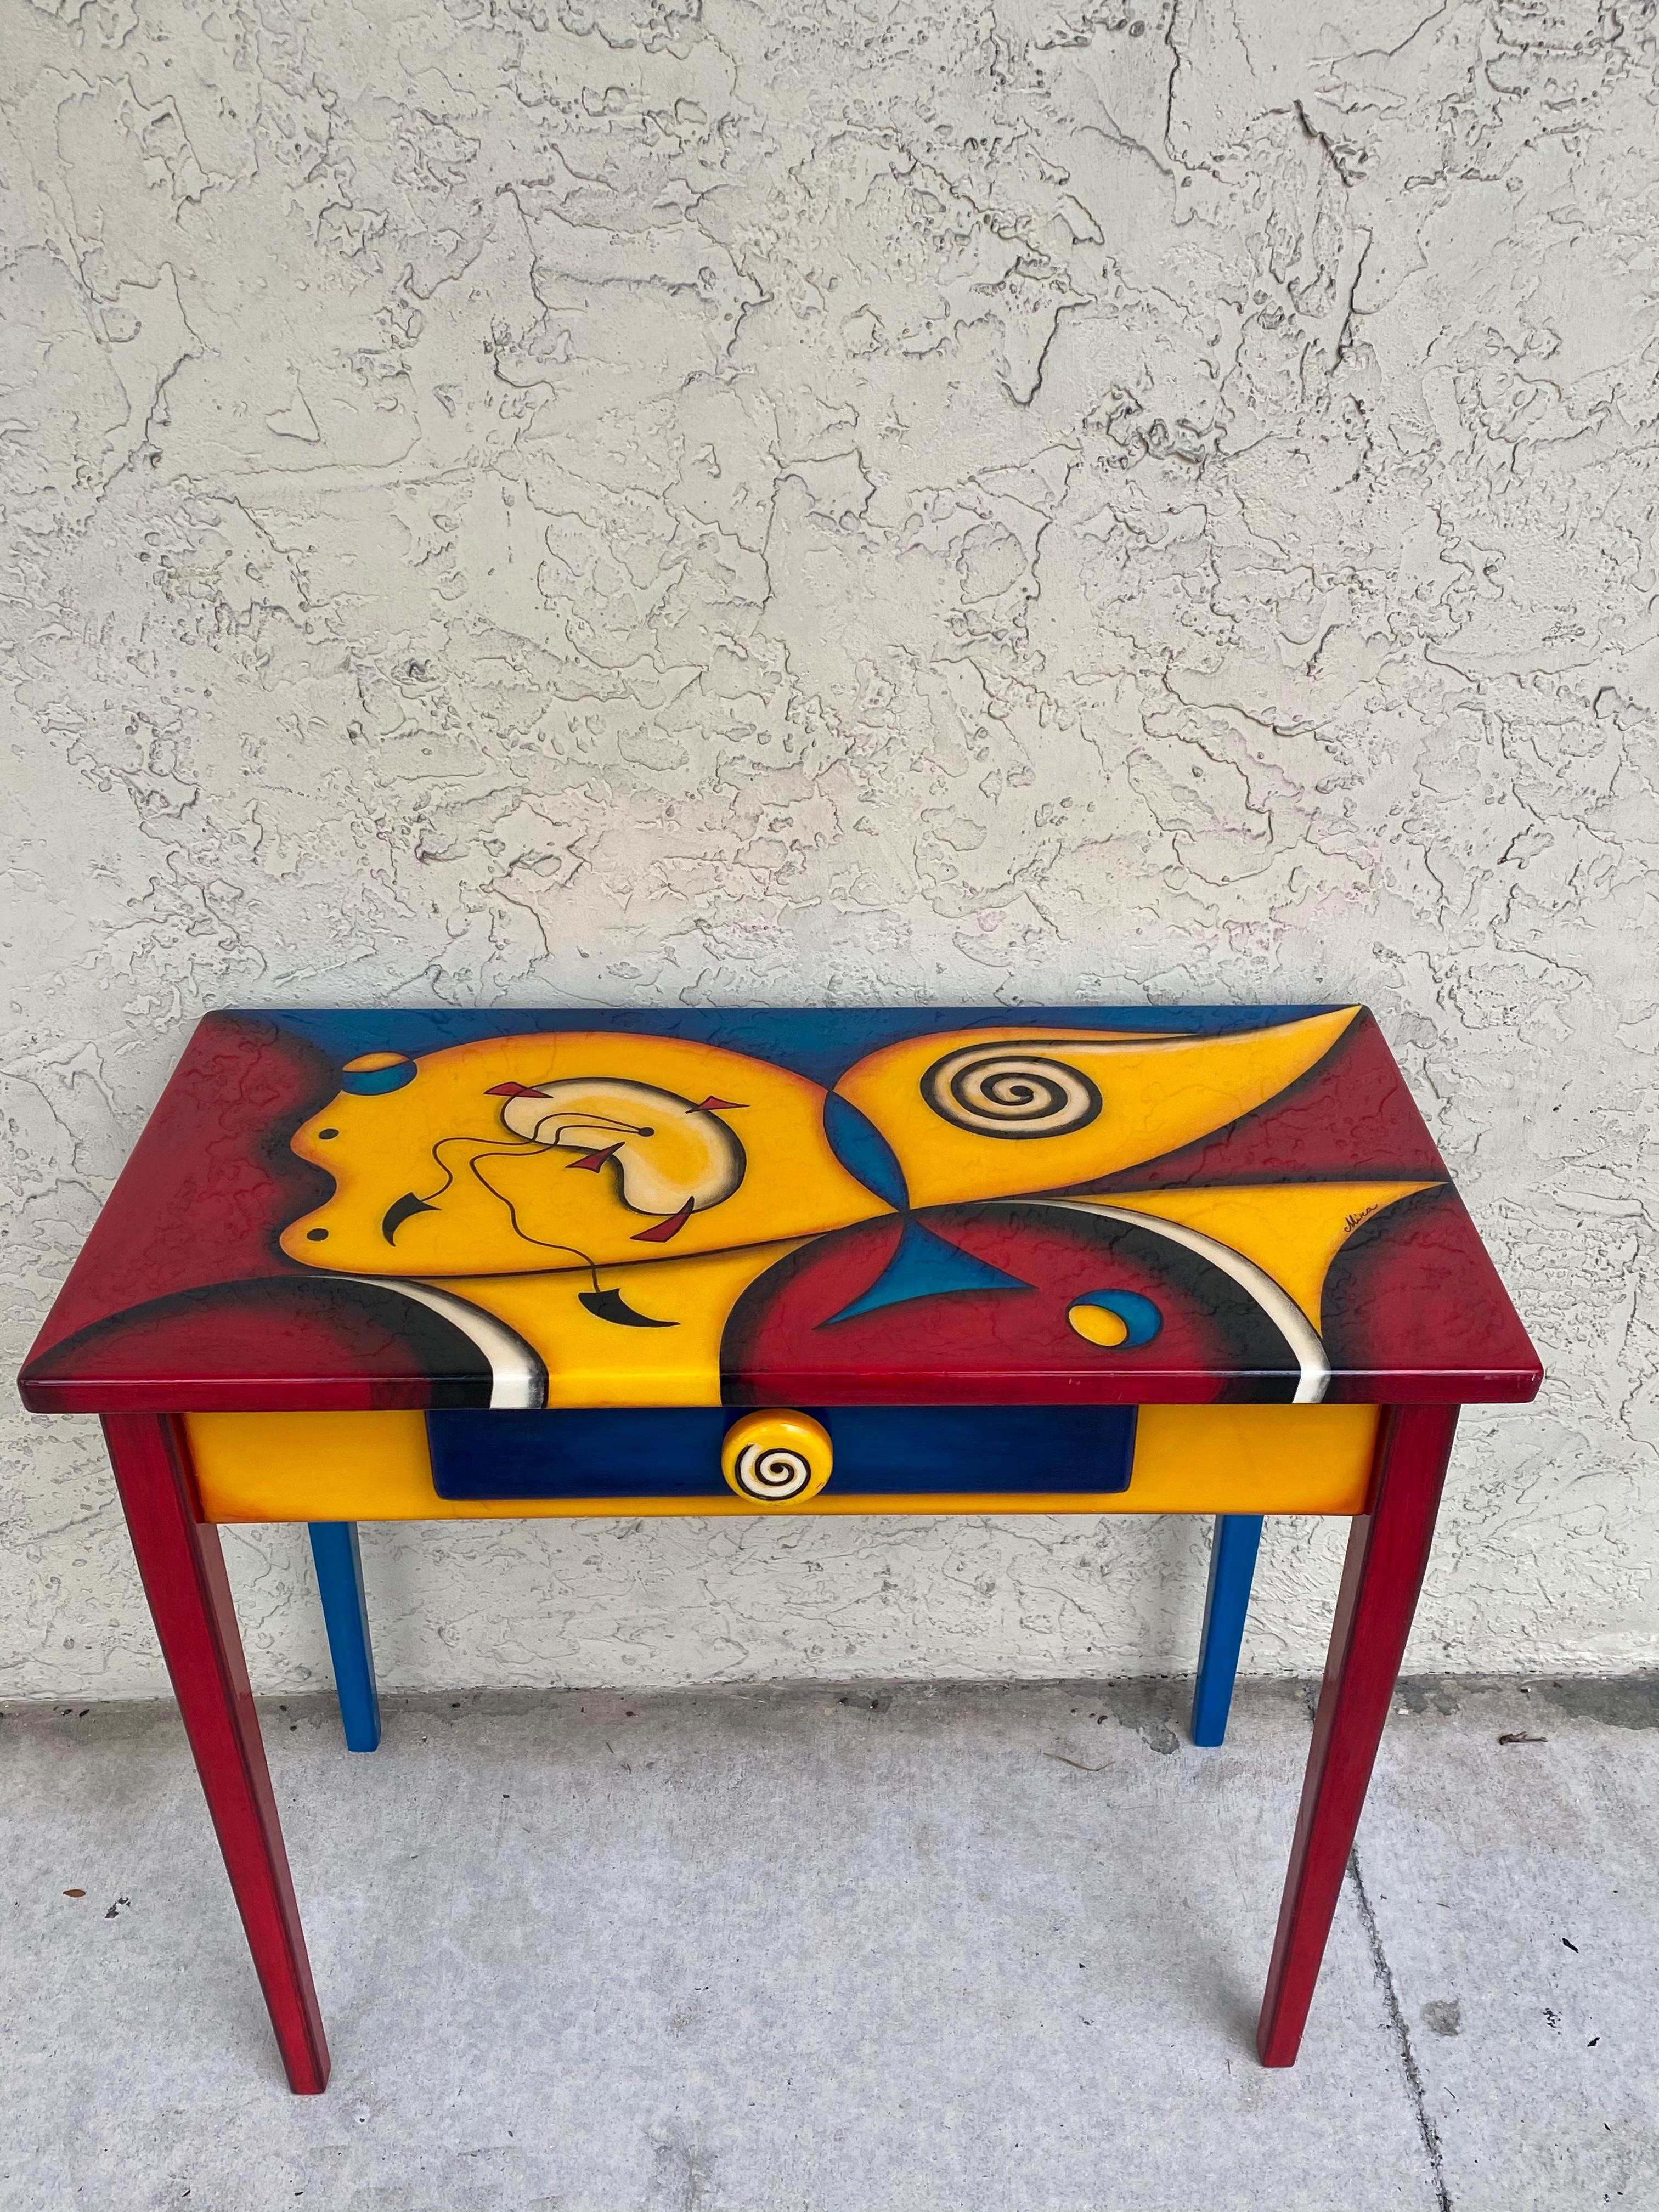 1990s Memphis Style Postmodern Abstract Art Console Desk and Mirror In Good Condition For Sale In Fort Lauderdale, FL